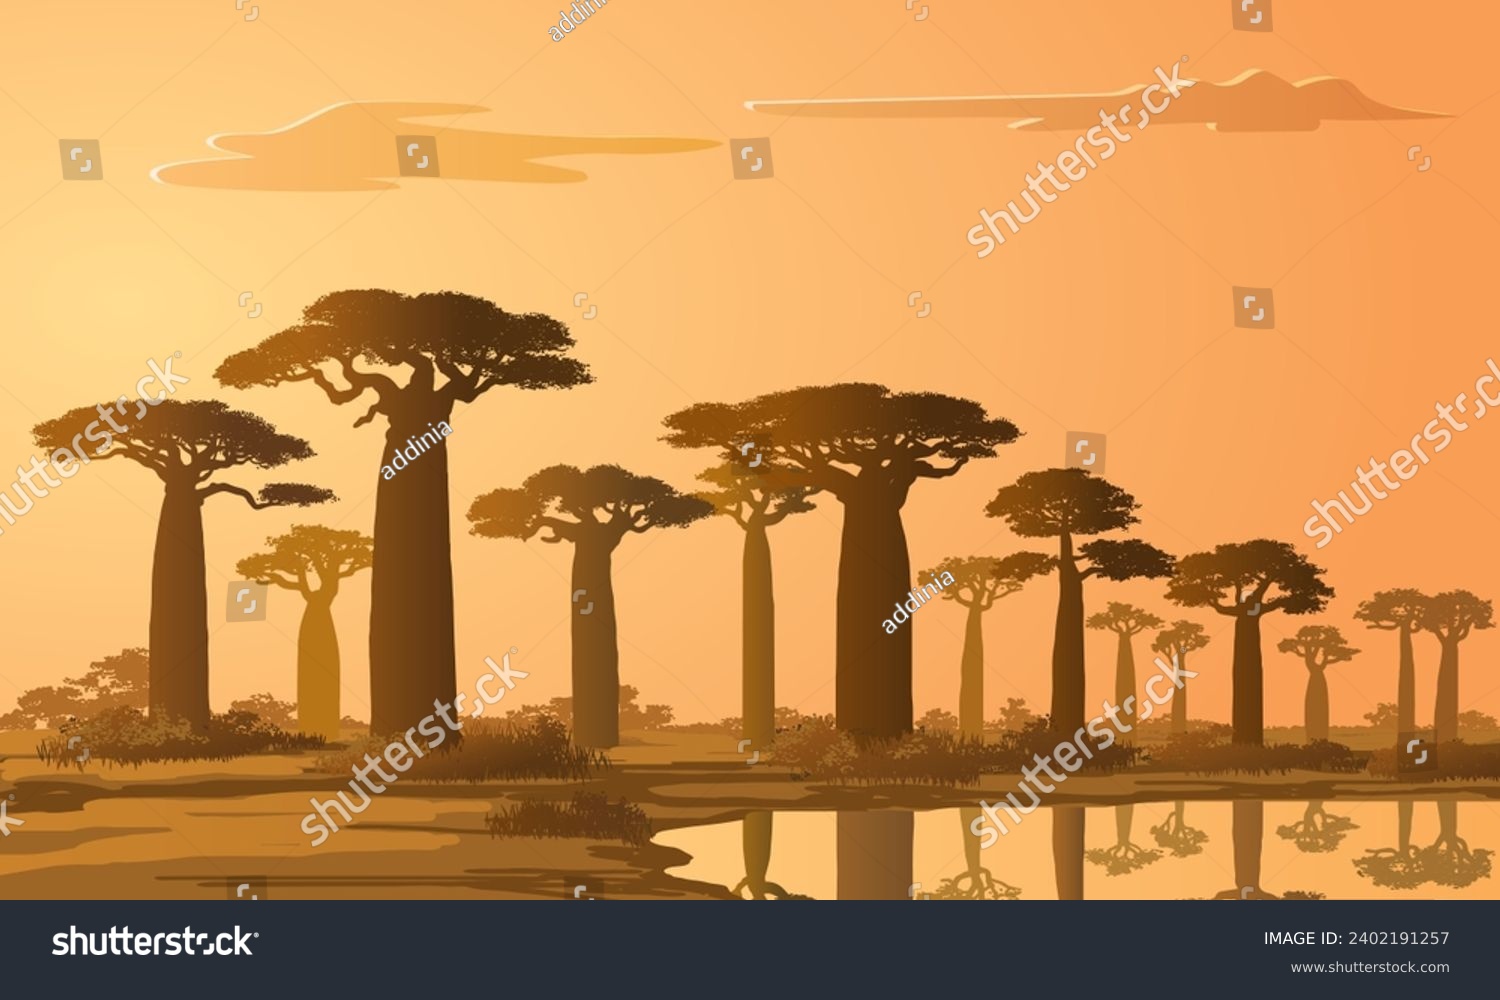 SVG of African Nature with Baobab Trees, Madagascar Landscape, vector illustration isolated, eps svg